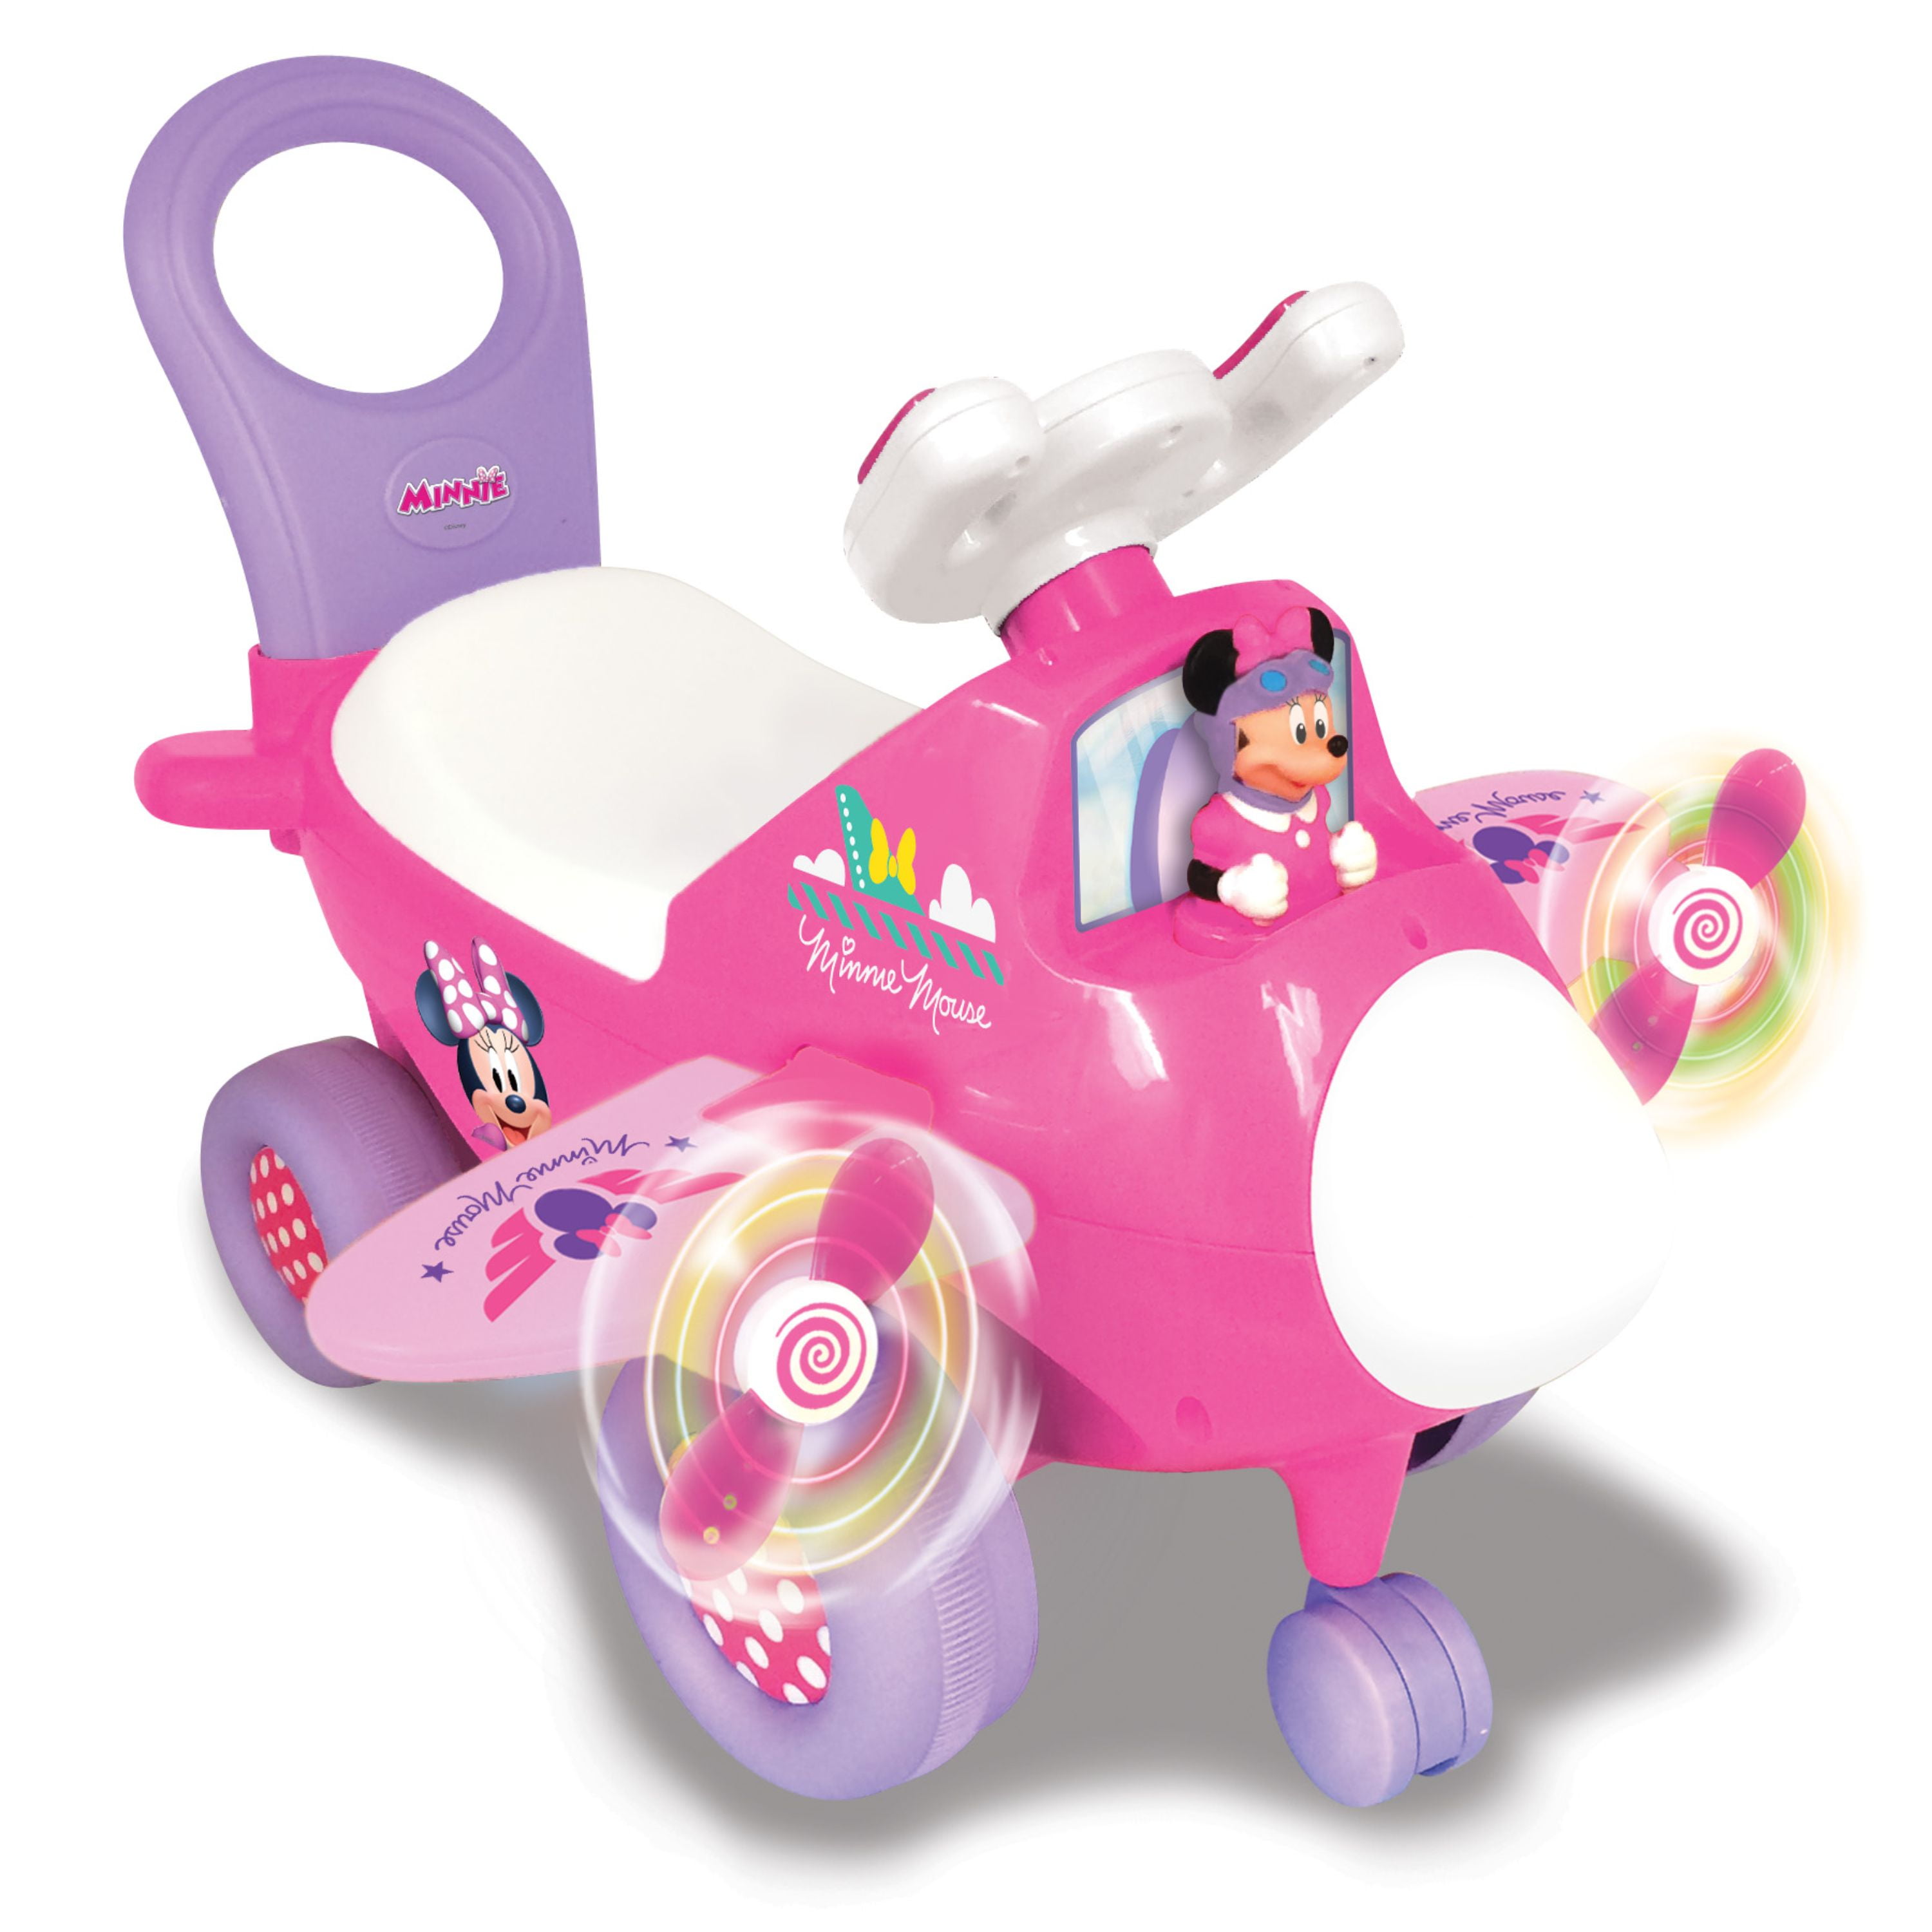 Disney Minnie Mouse Plane Ride On Kids Toy Gift Kids Toy Gift 